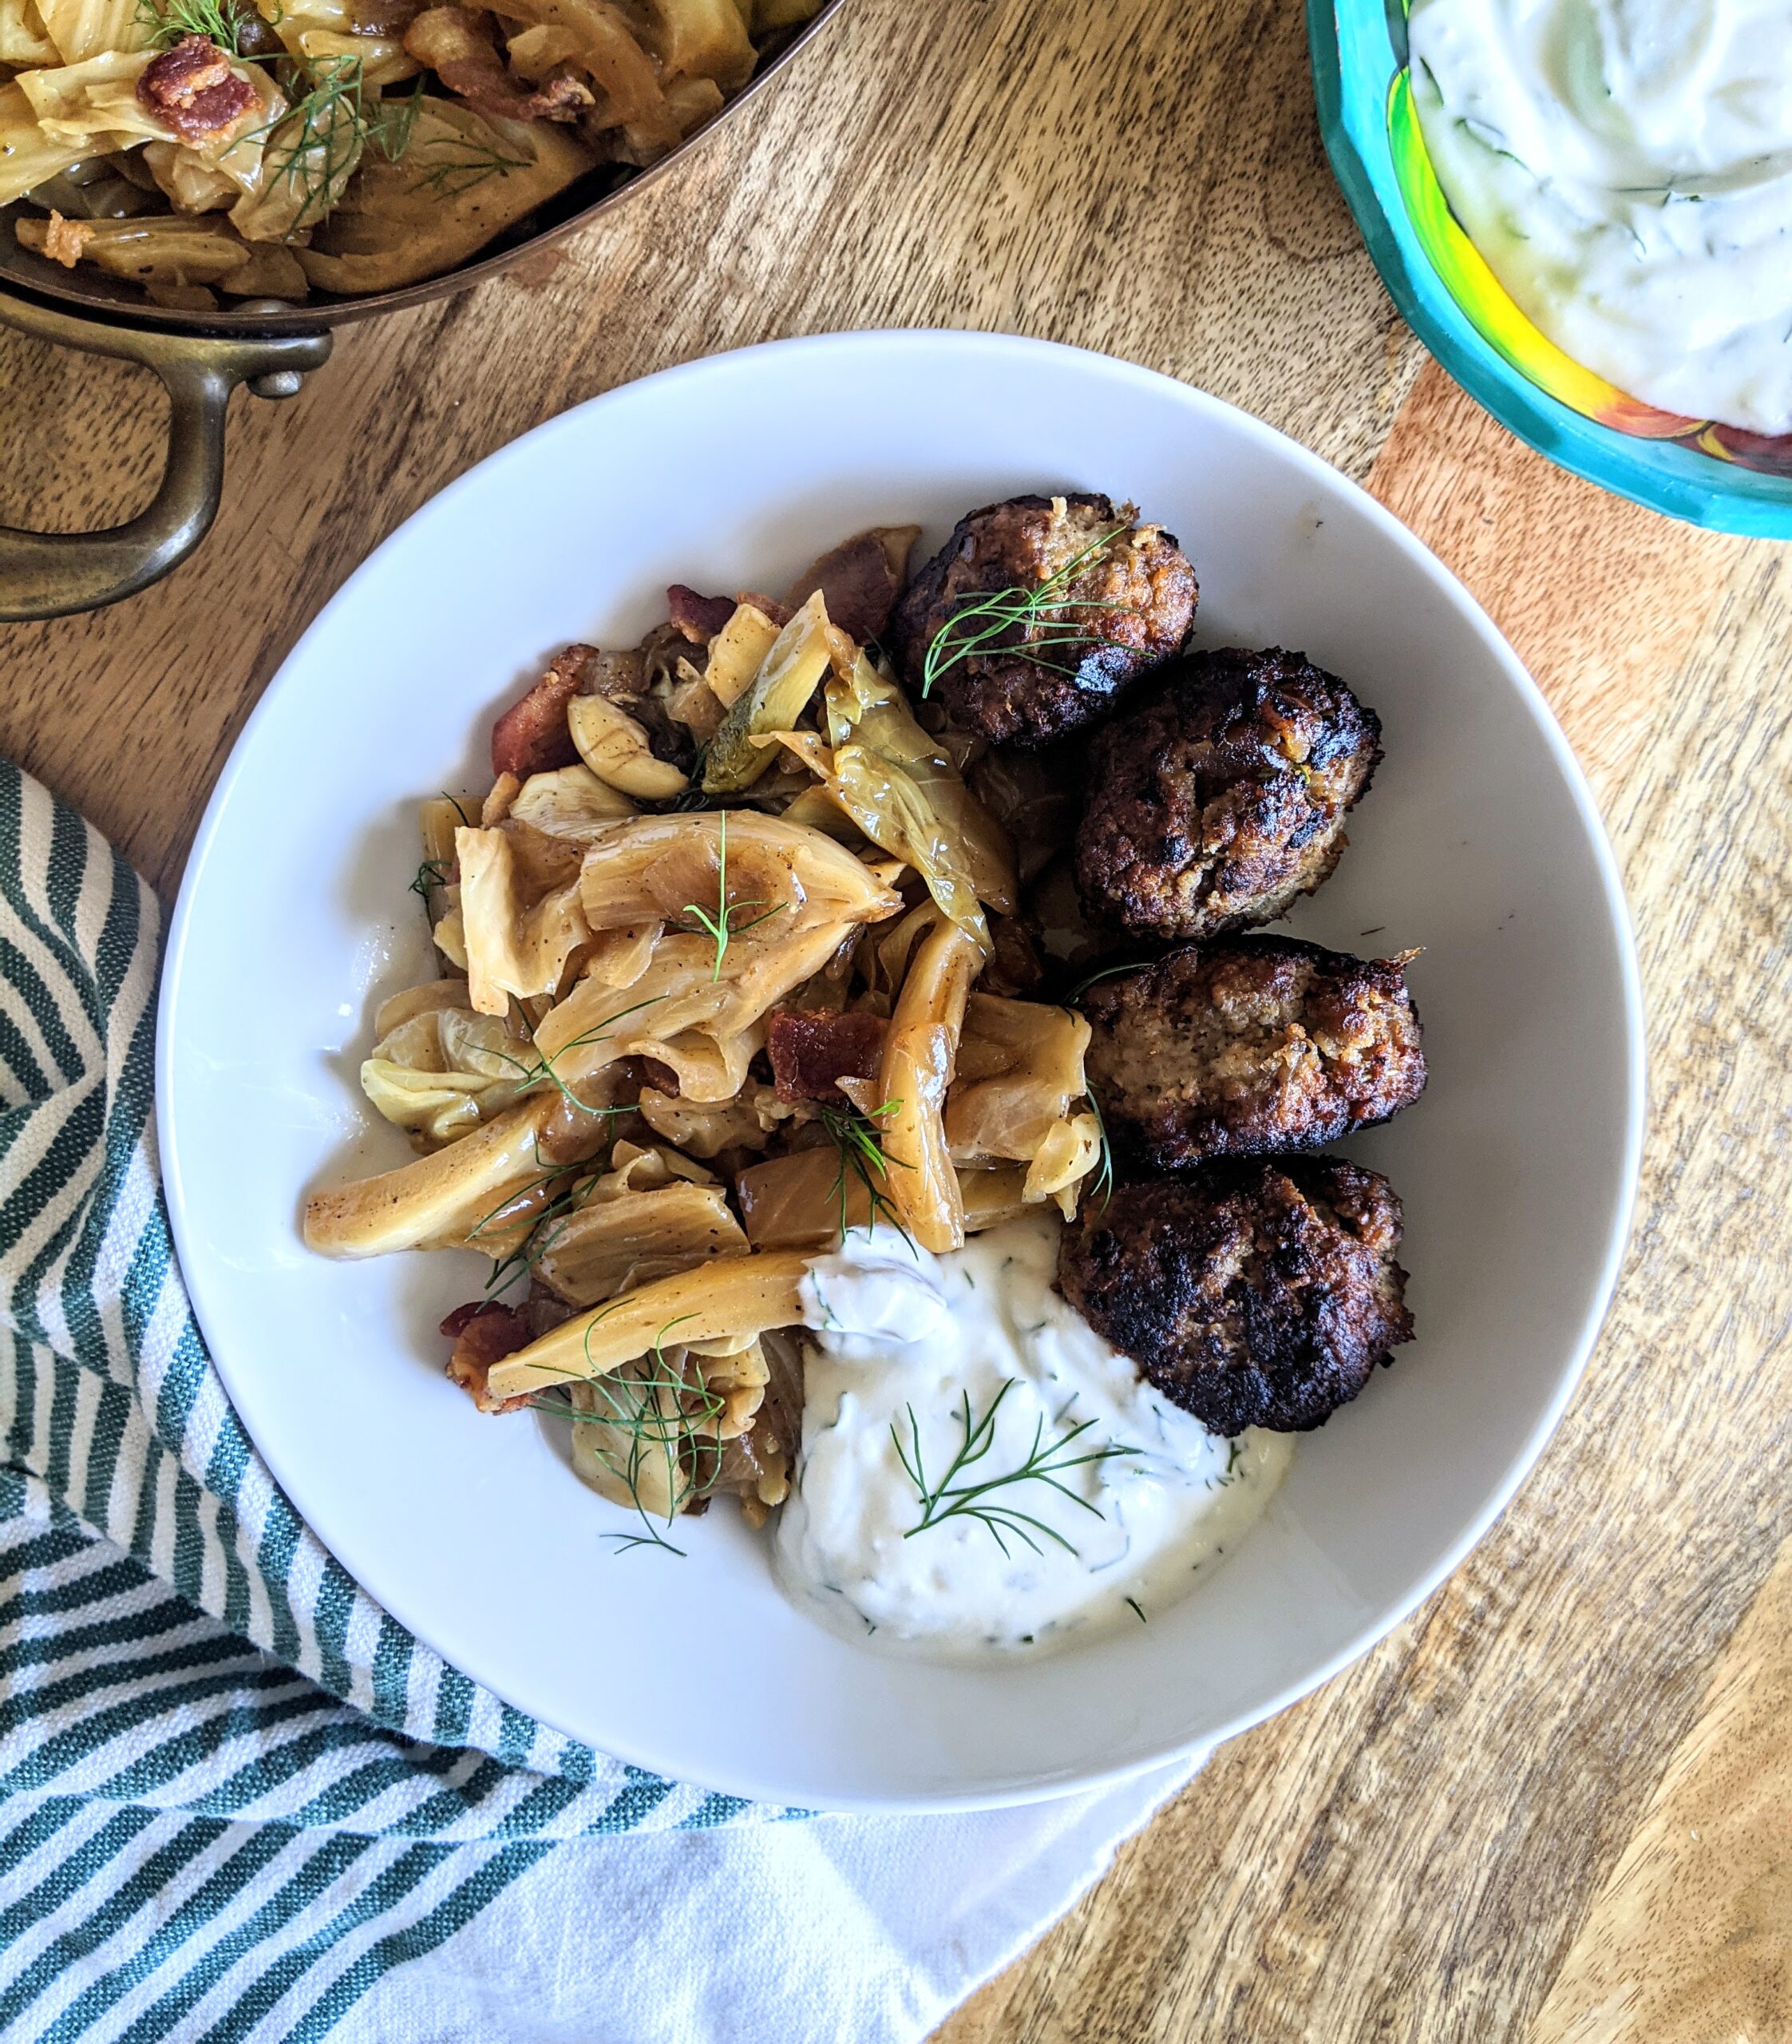 Four pan-fried meatballs stuffed with sweet sun-dried dates from summertime and tart apples. Served alongside apple cider vinegar braised cabbage and fennel, and a yogurt and dill sauce.